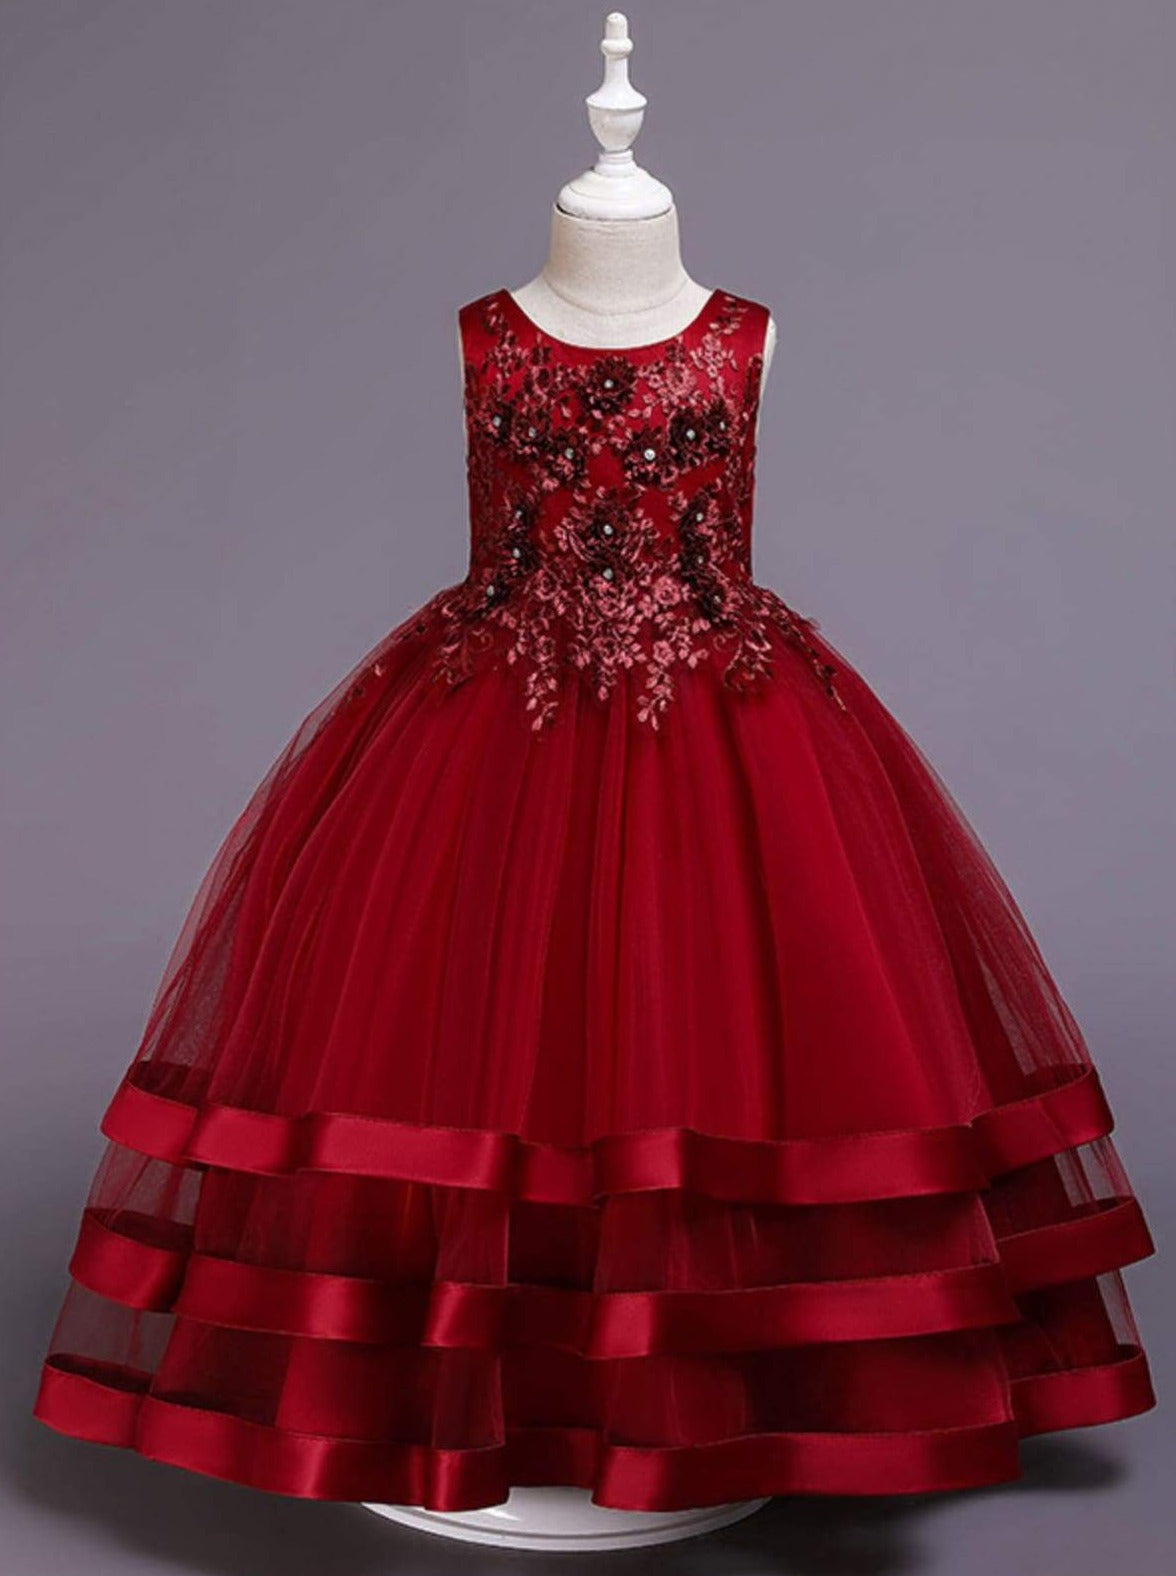 Winter Formal Wear | Girls Sleeveless Lace Embroidered Holiday Gown